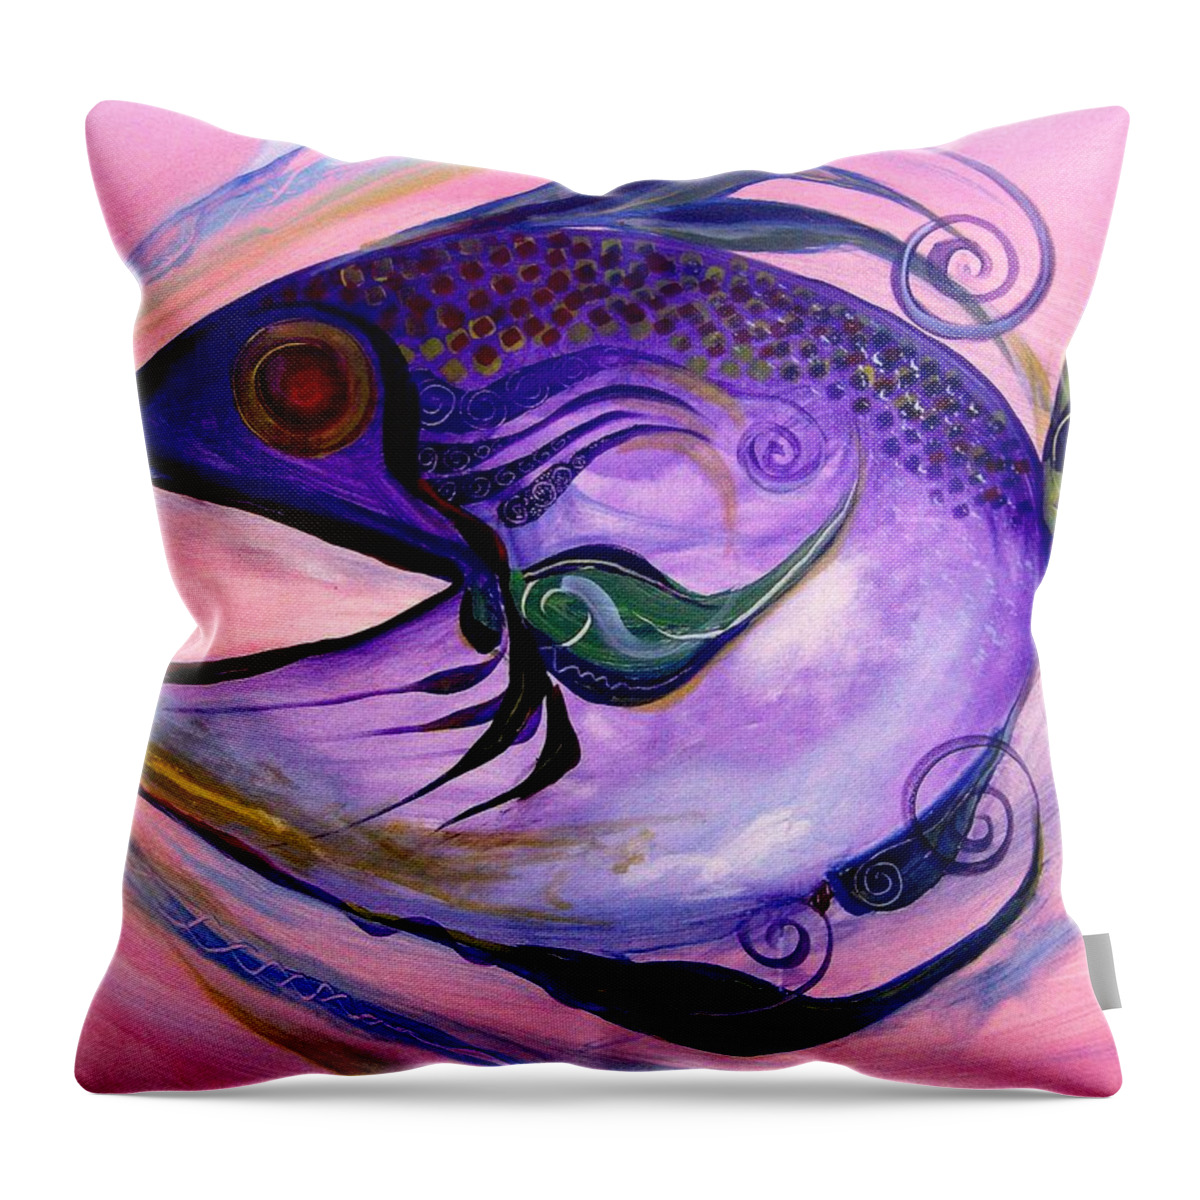 Fish Throw Pillow featuring the painting Melanie Fish One by J Vincent Scarpace